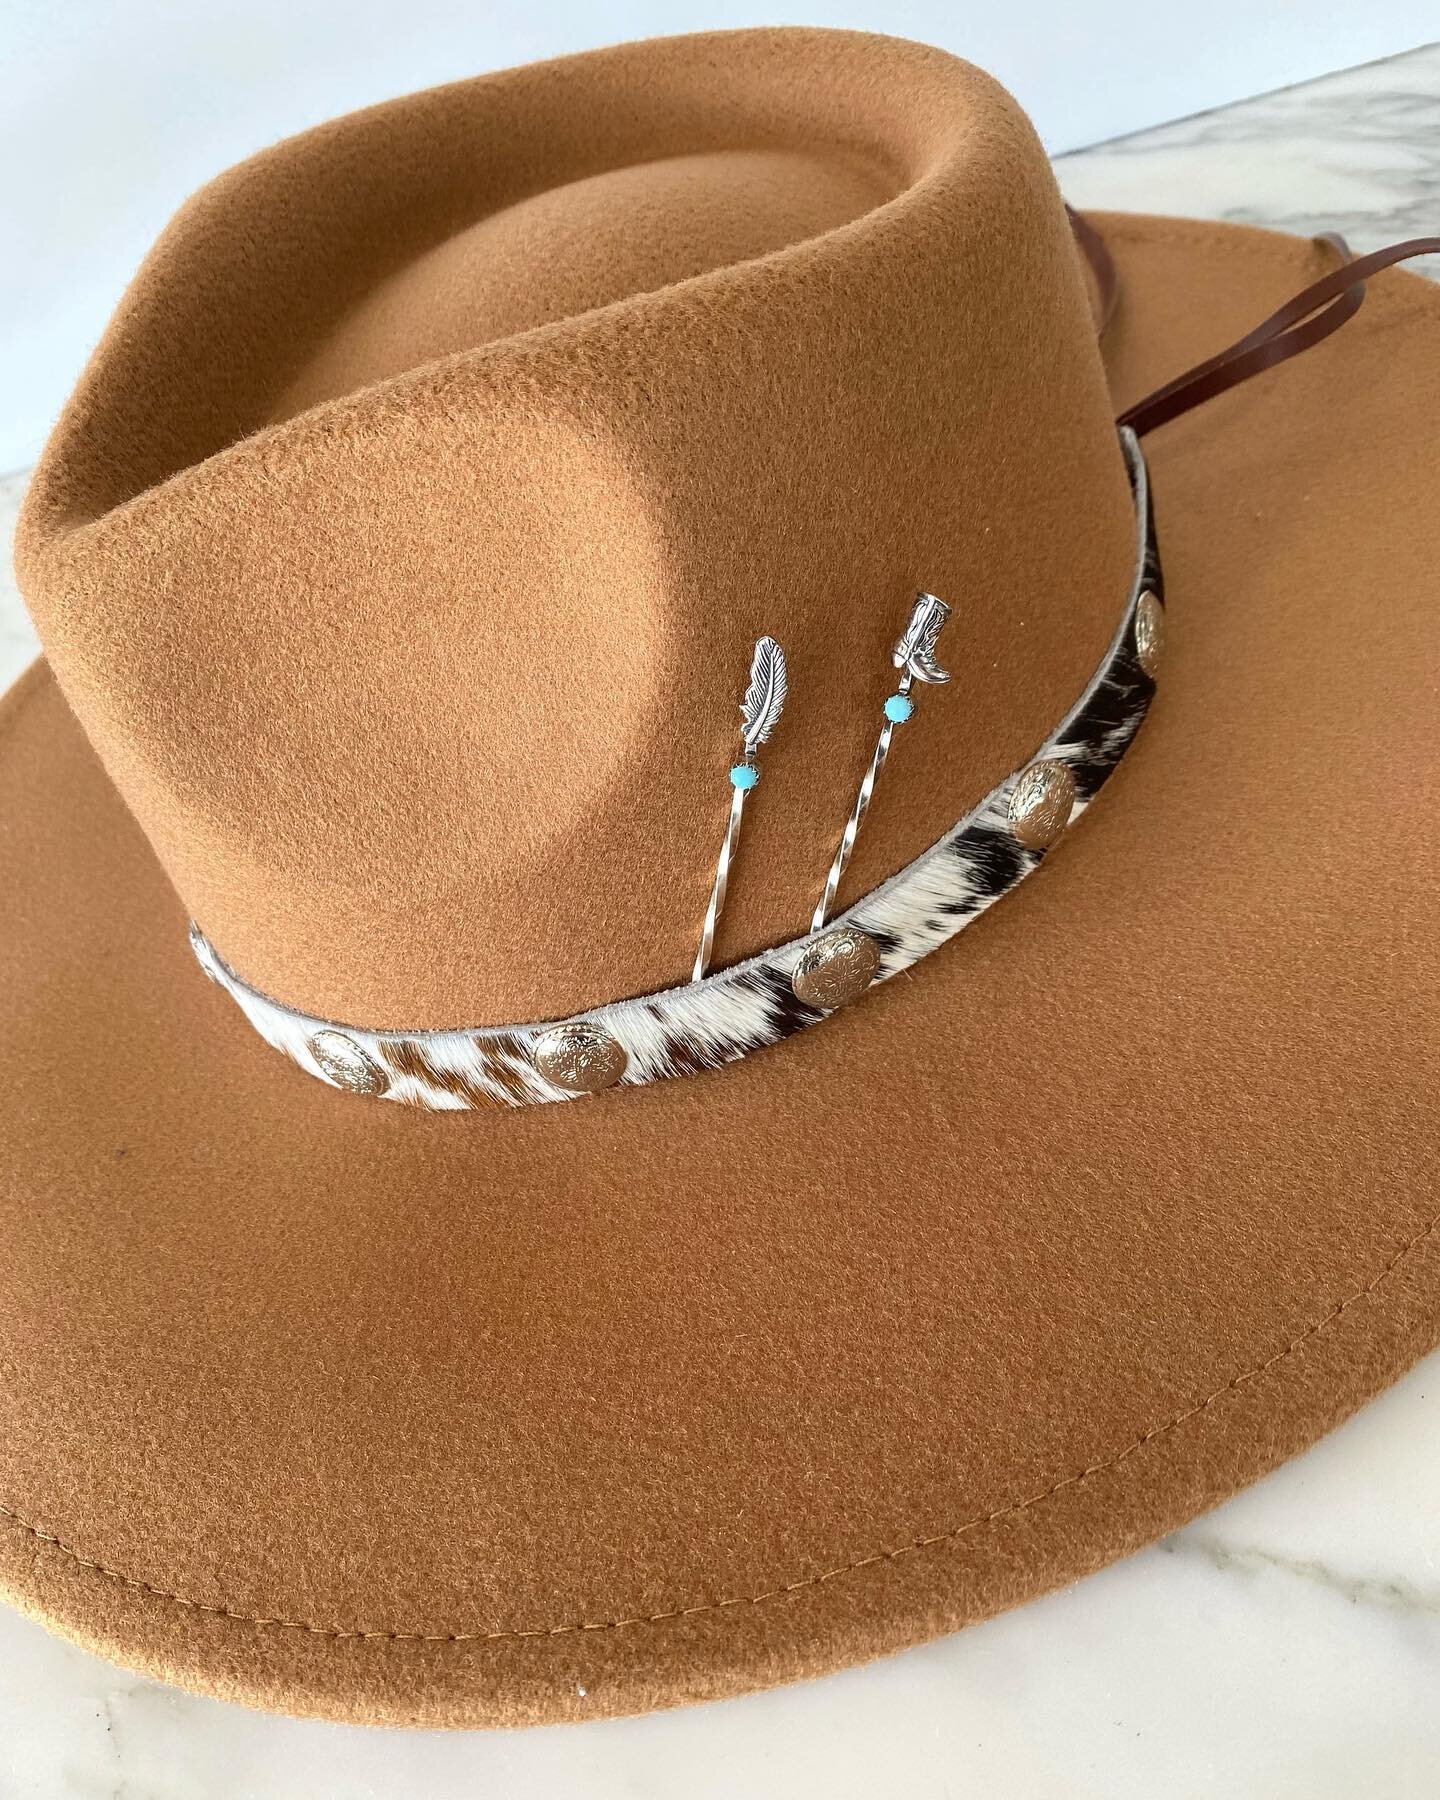 Embellishing your hat is so much fun!! Checkout these sterling silver and turquoise hat pins&hellip;stinking cute!